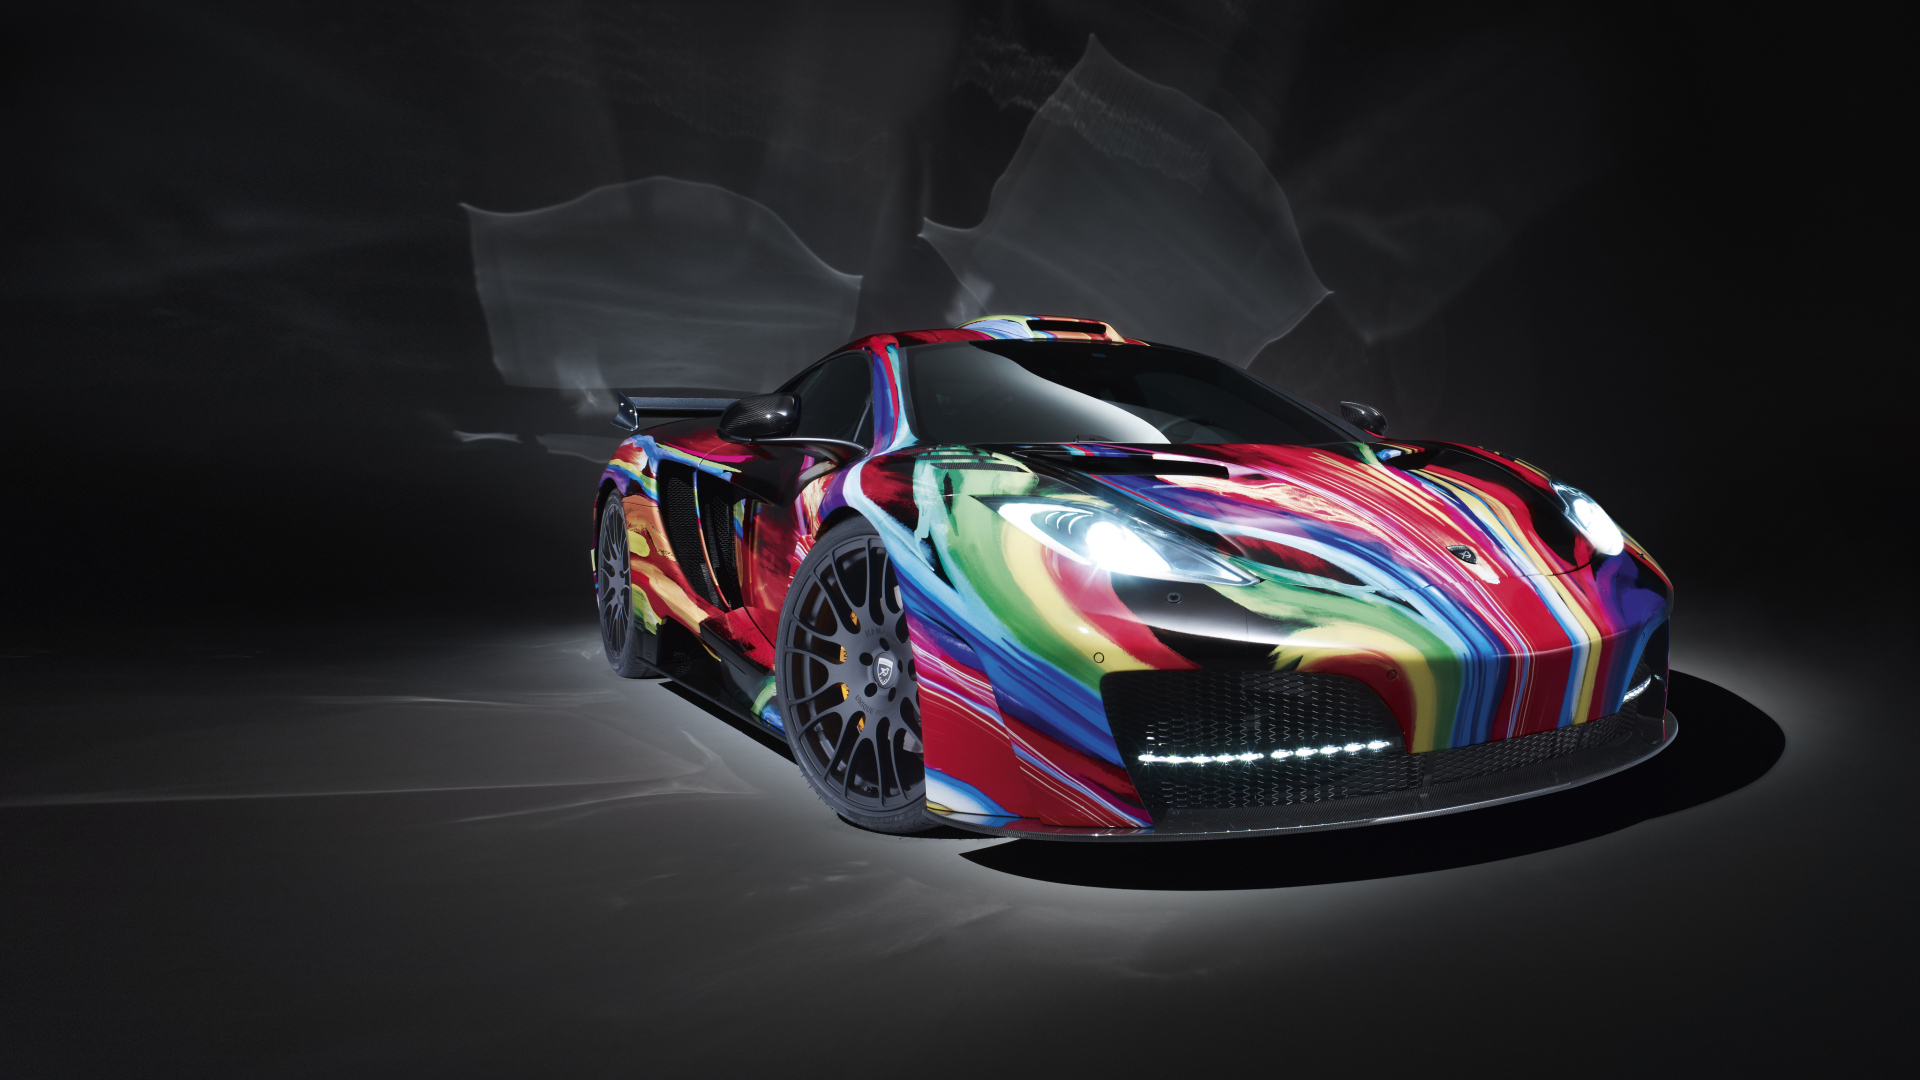 Hamann MemoR sports car with multicolored graphics